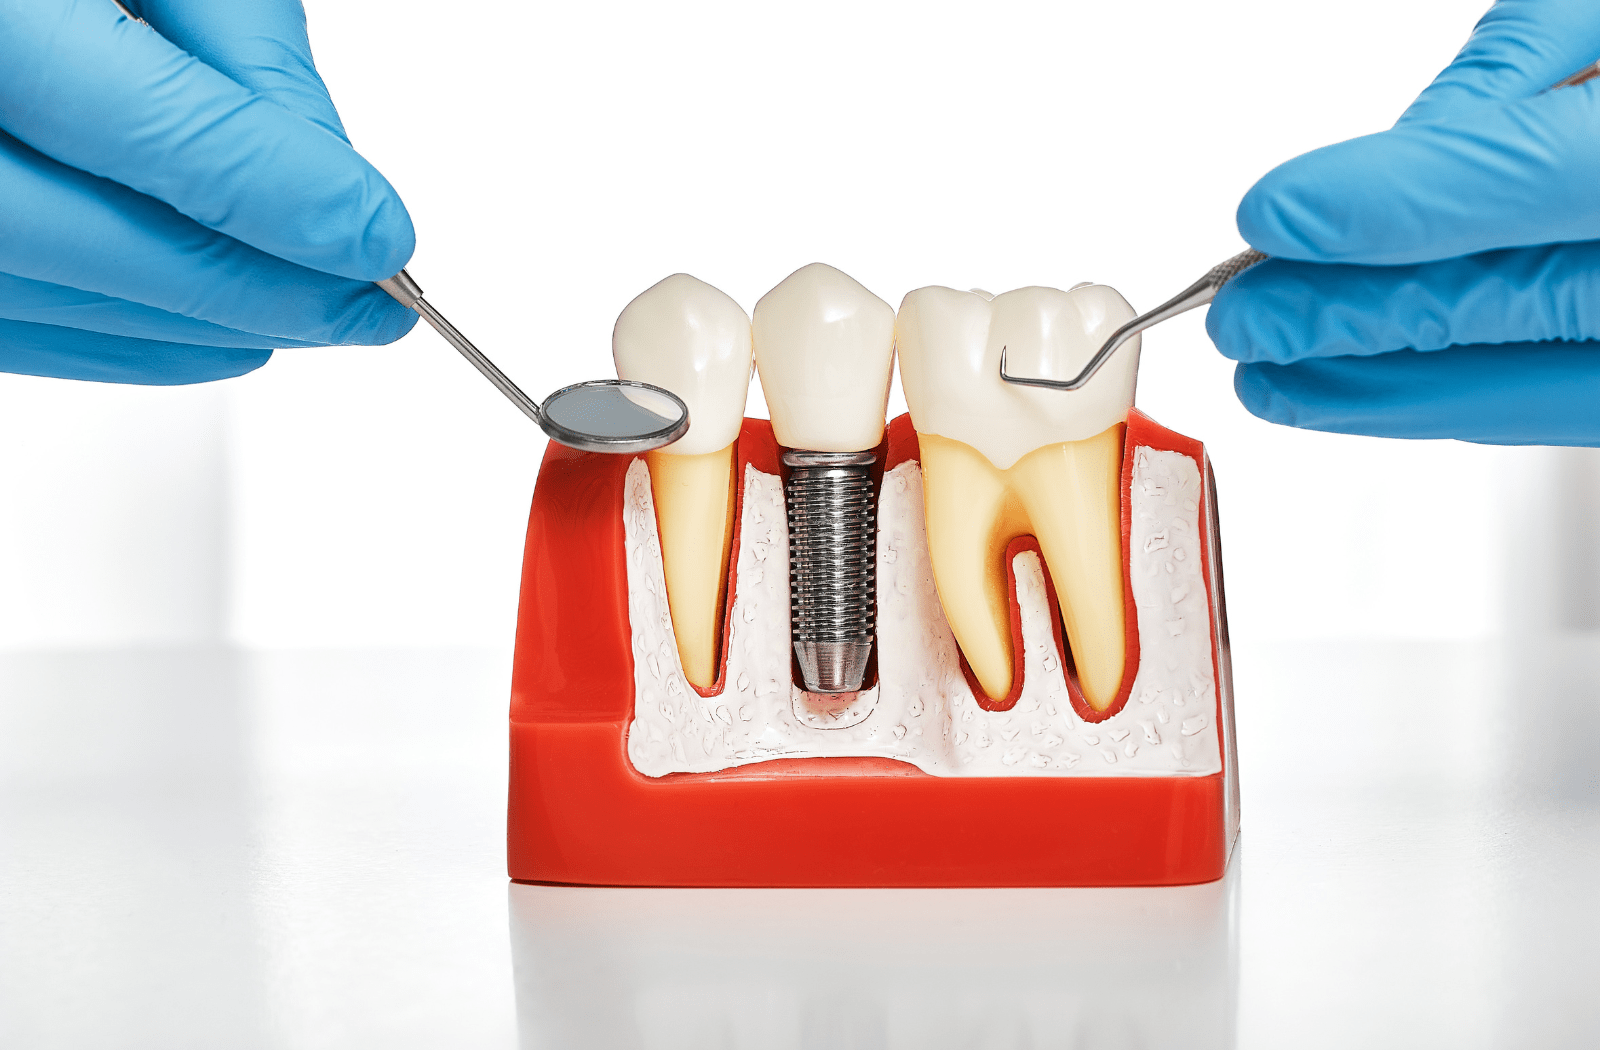 A dentist uses dental tools near a plastic model of teeth with a dental implant present in the middle to show what a dental implant looks like